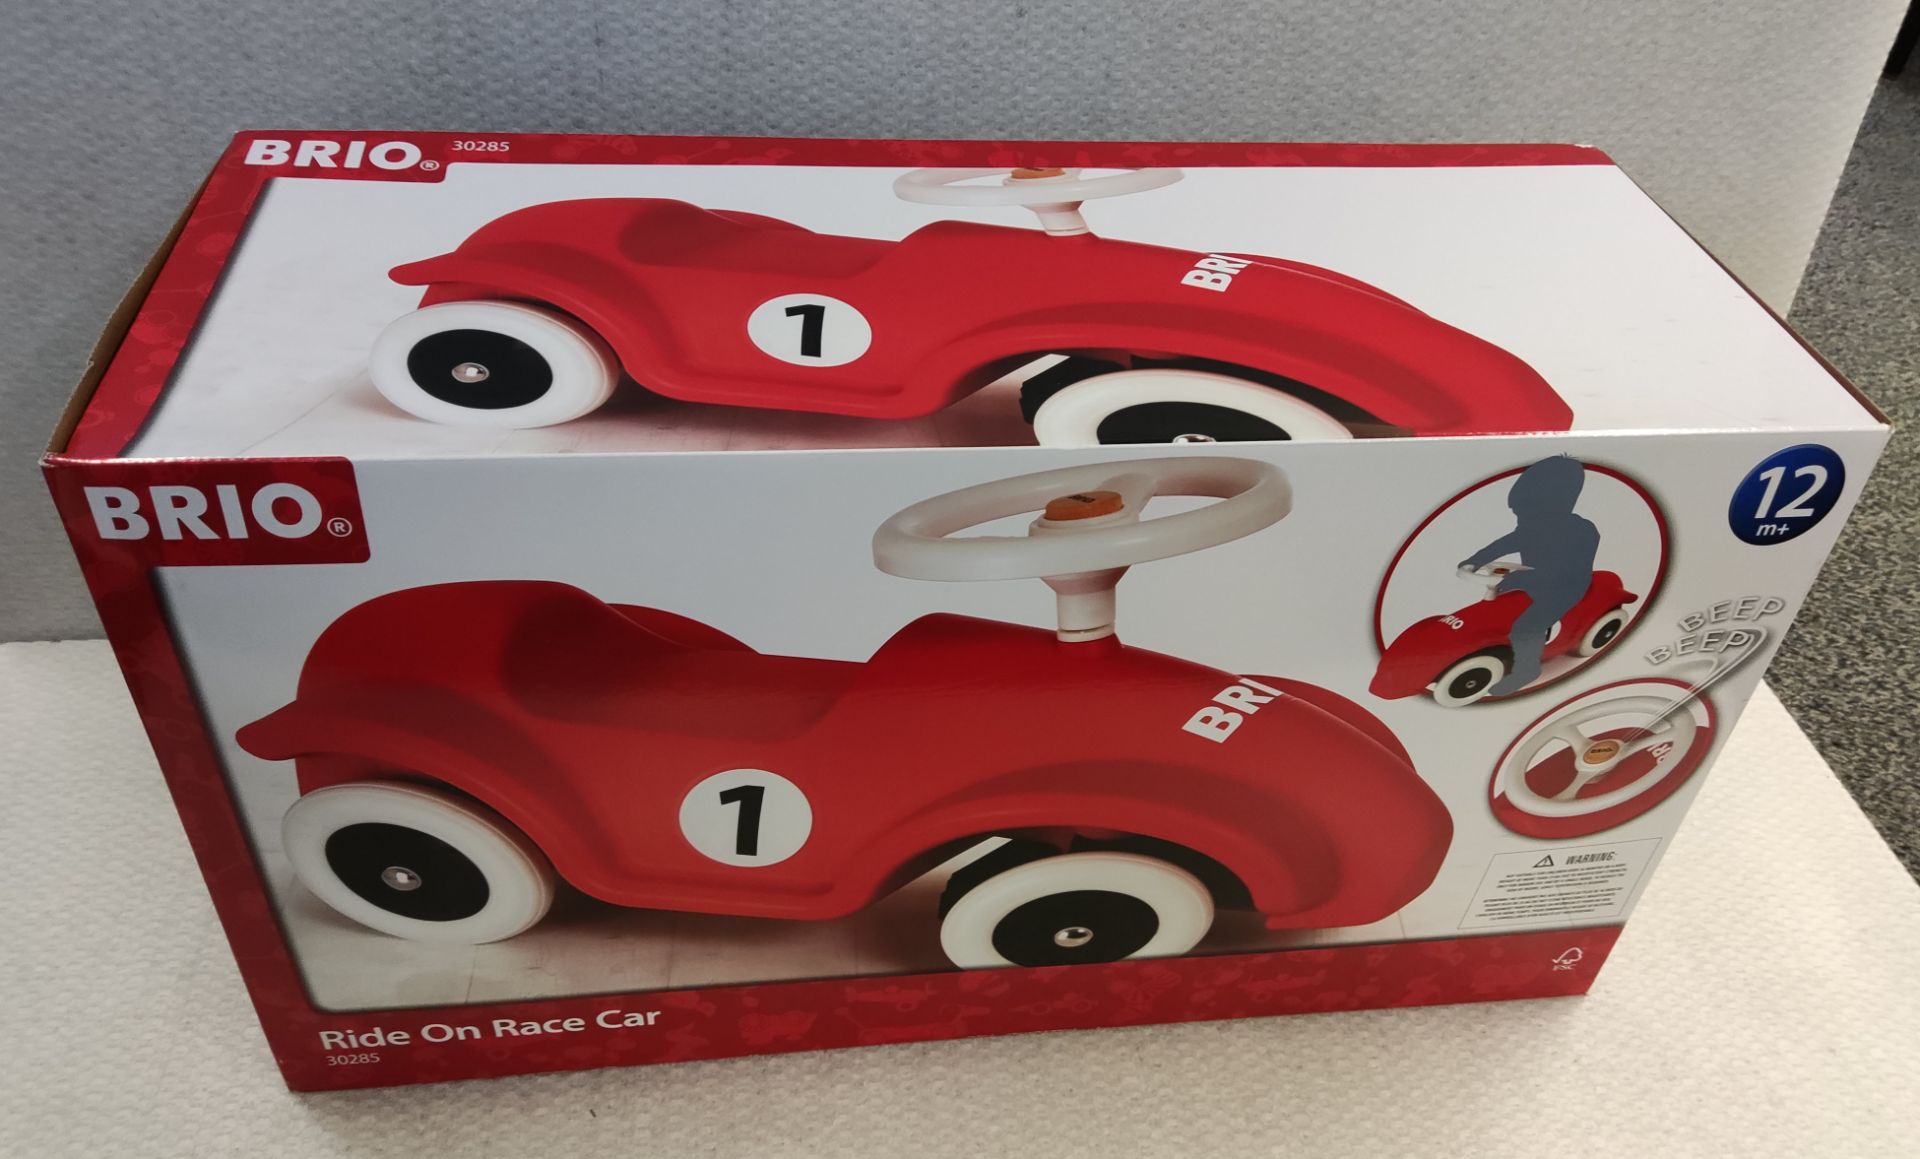 1 x Brio Ride On Race Car - Model 30285 - New/Boxed - Image 3 of 8